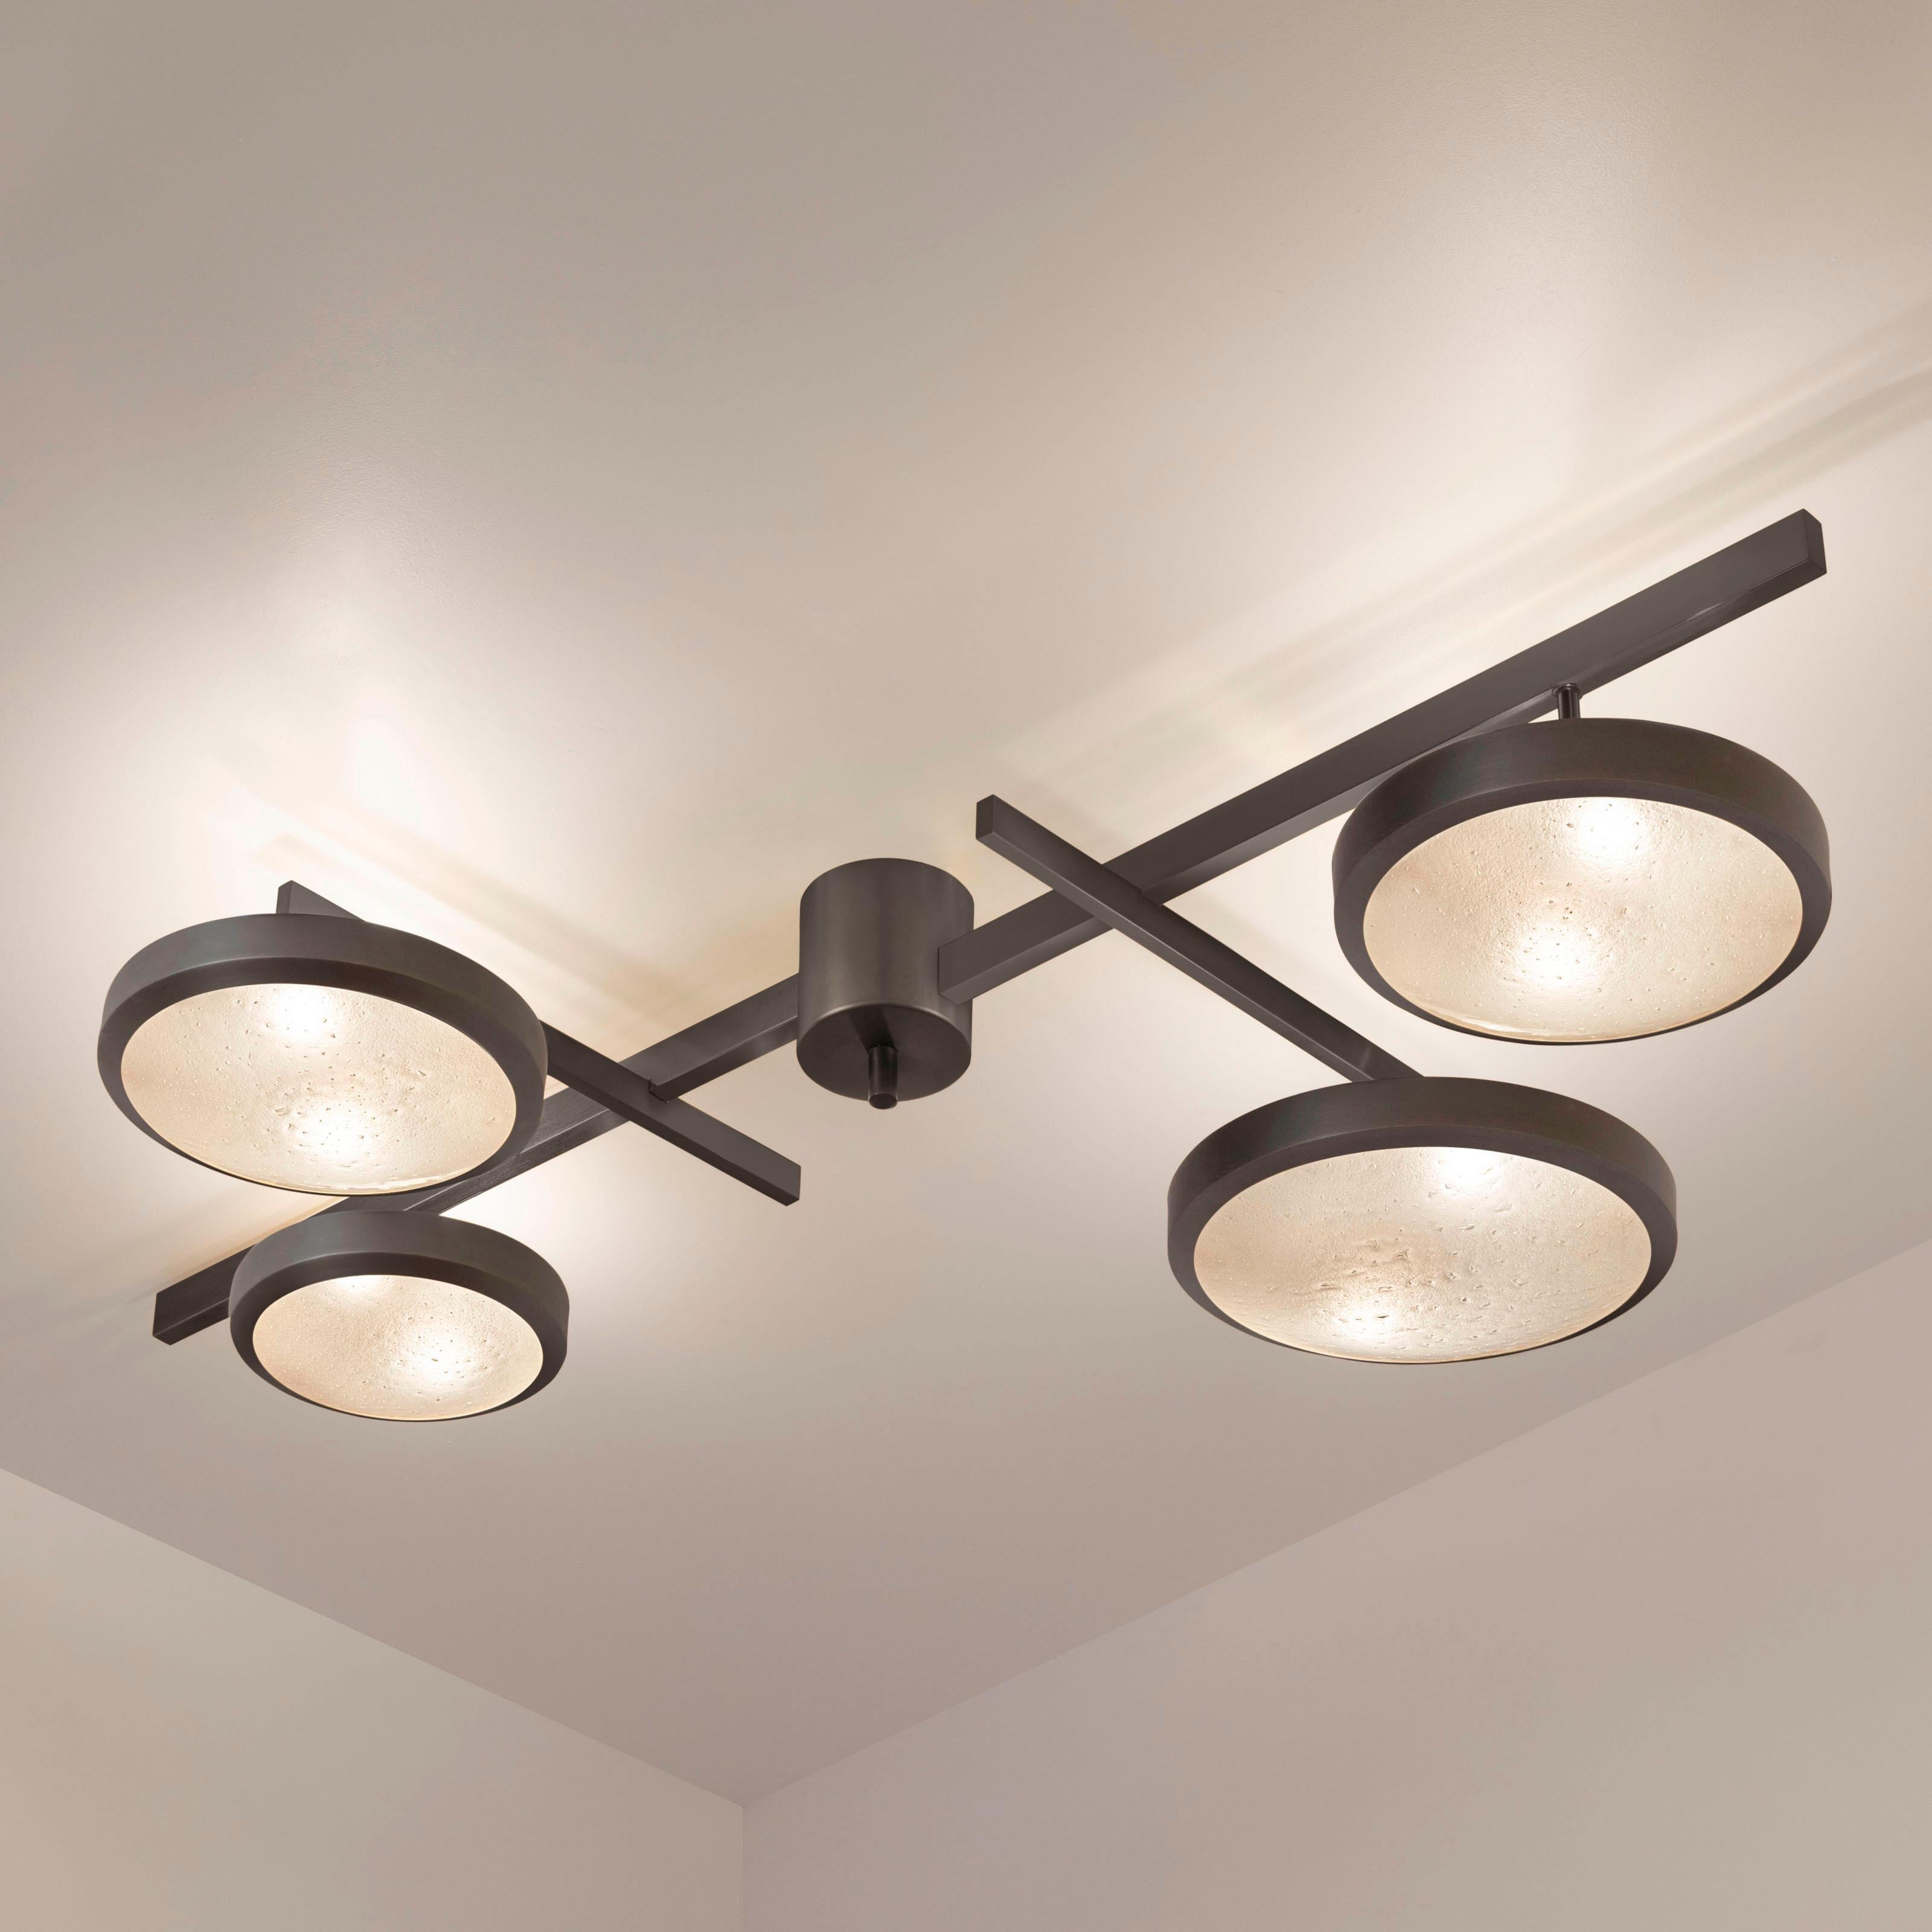 Tetrix Ceiling Light by Gaspare Asaro- Satin Nickel Finish In New Condition For Sale In New York, NY